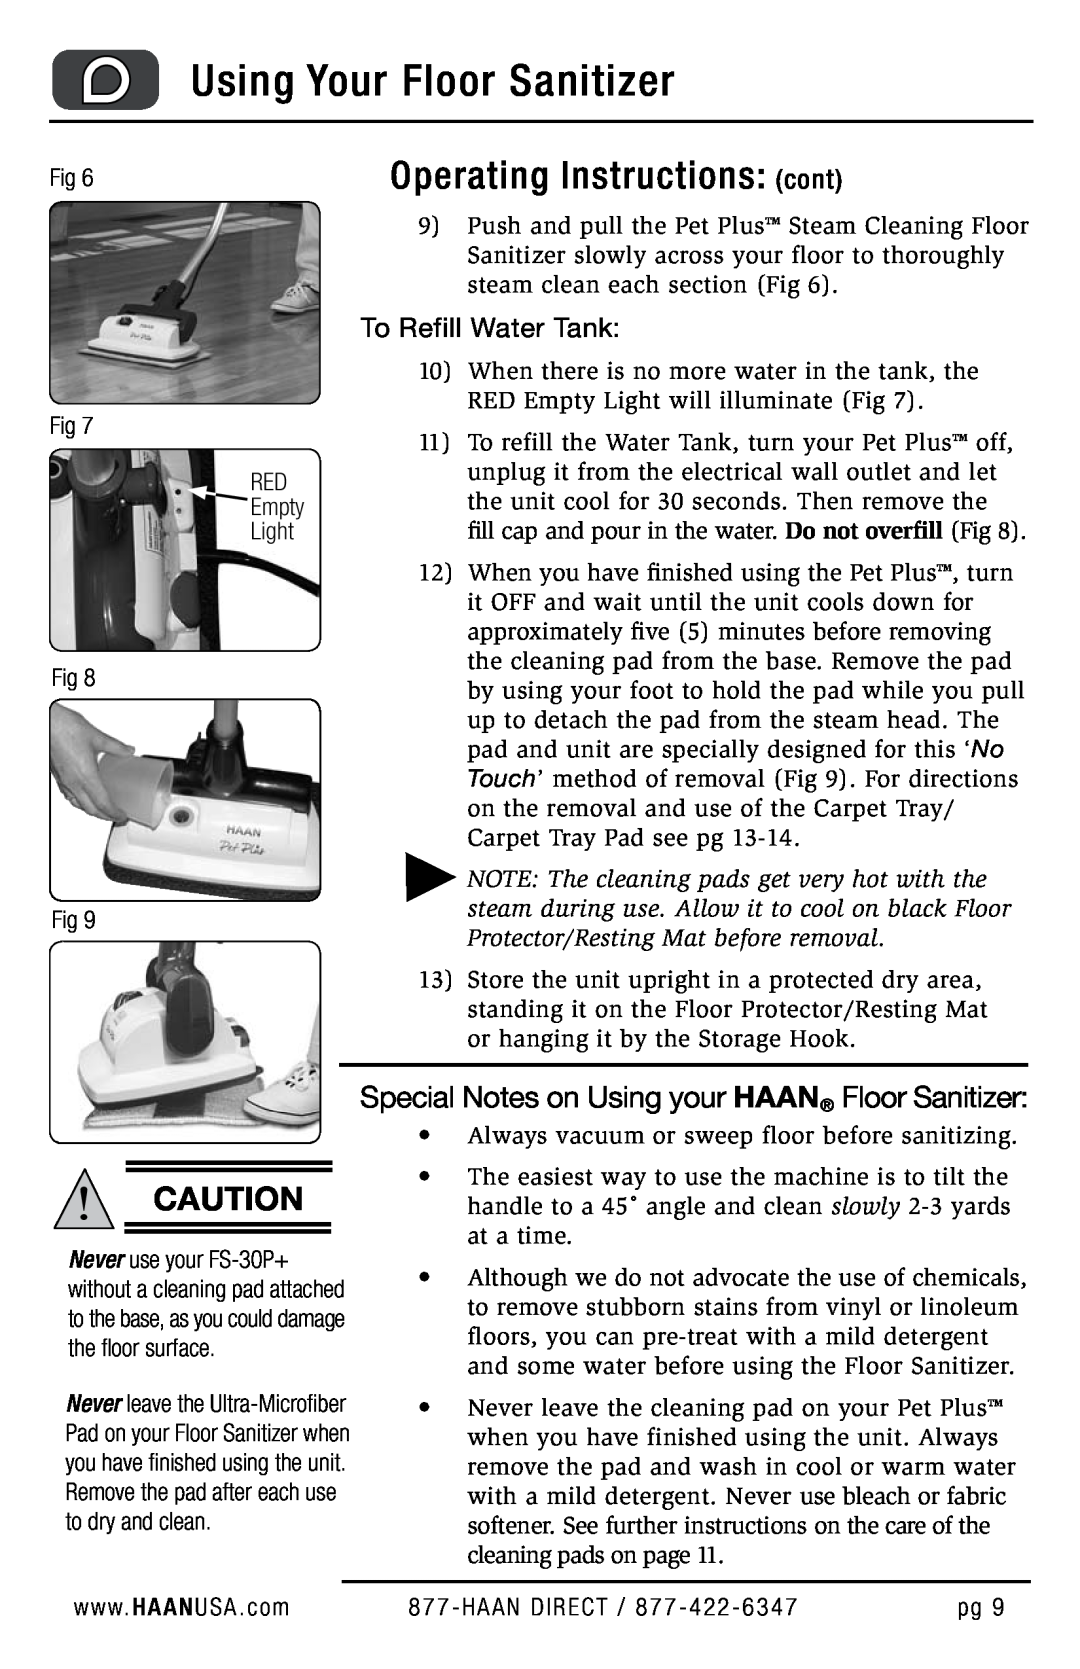 Haan FS-30P+ user manual Special Notes on Using your HAAN Floor Sanitizer, To Refill Water Tank, cleaning pads on page 